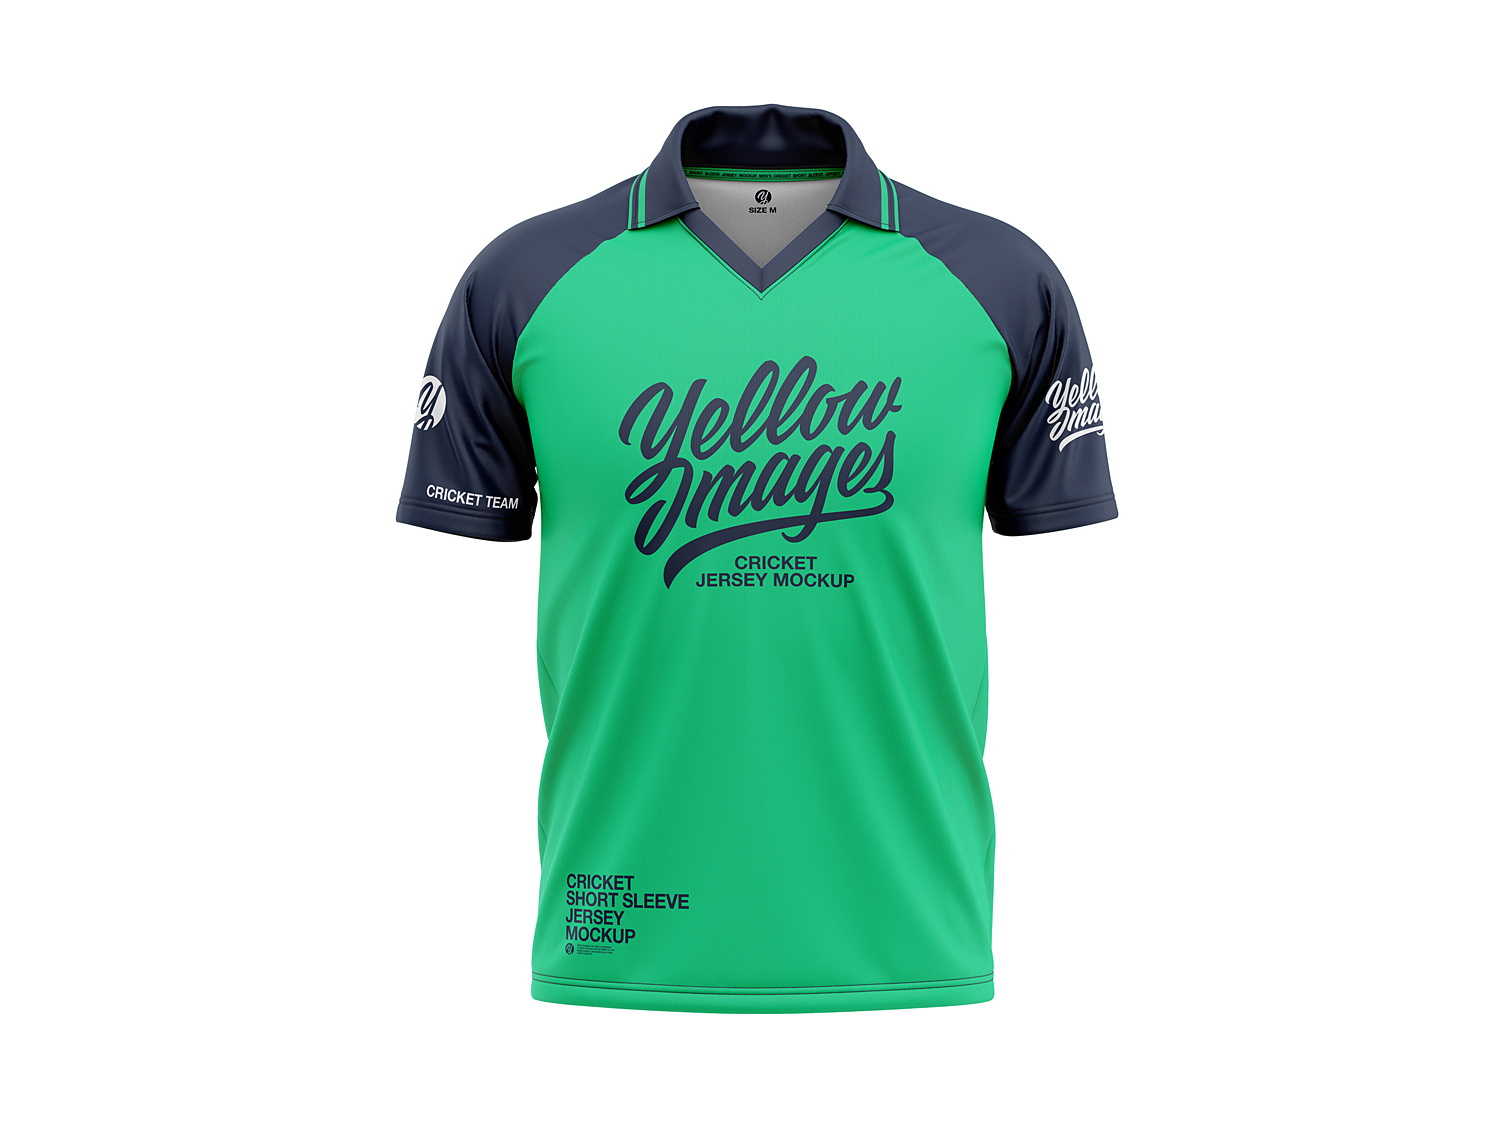 Download Cricket Jersey Mockup By Cg Tailor On Dribbble PSD Mockup Templates